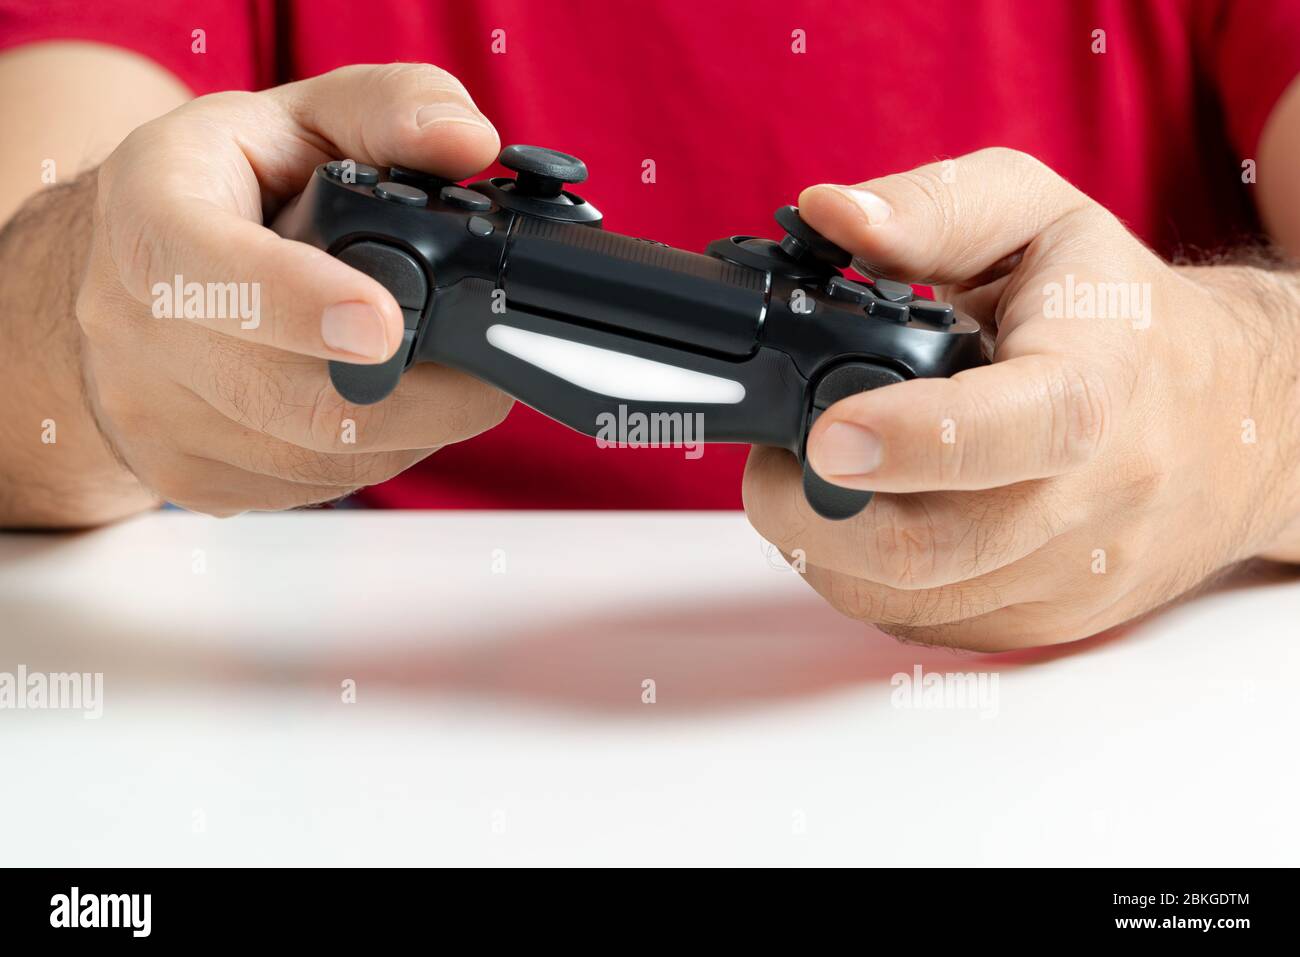 Video game controller in hands white background Stock Photo